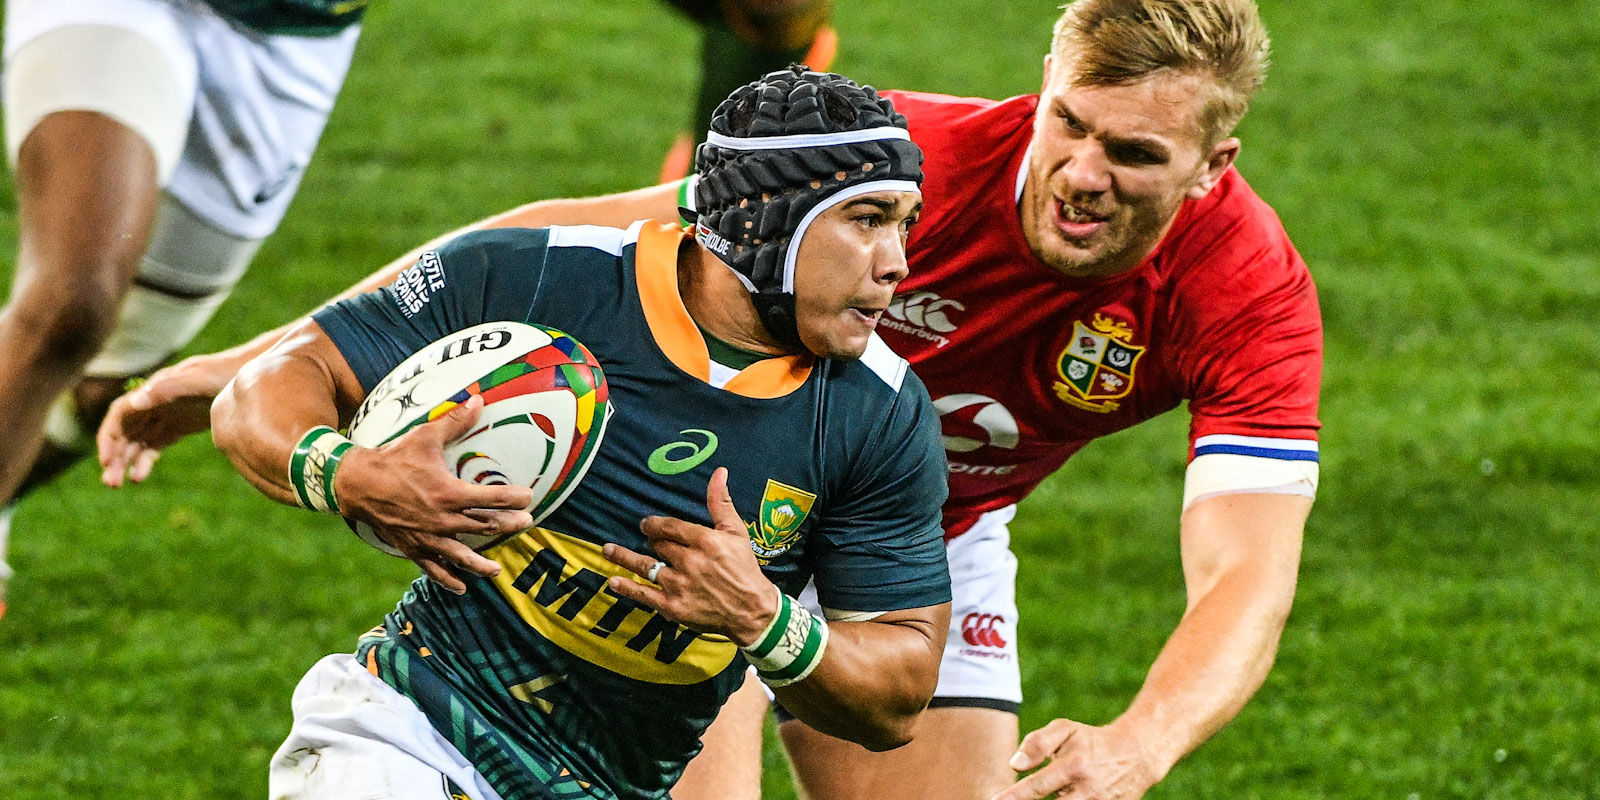 Cheslin Kolbe was brilliant in his first match in green and gold since the RWC Final in 2019.